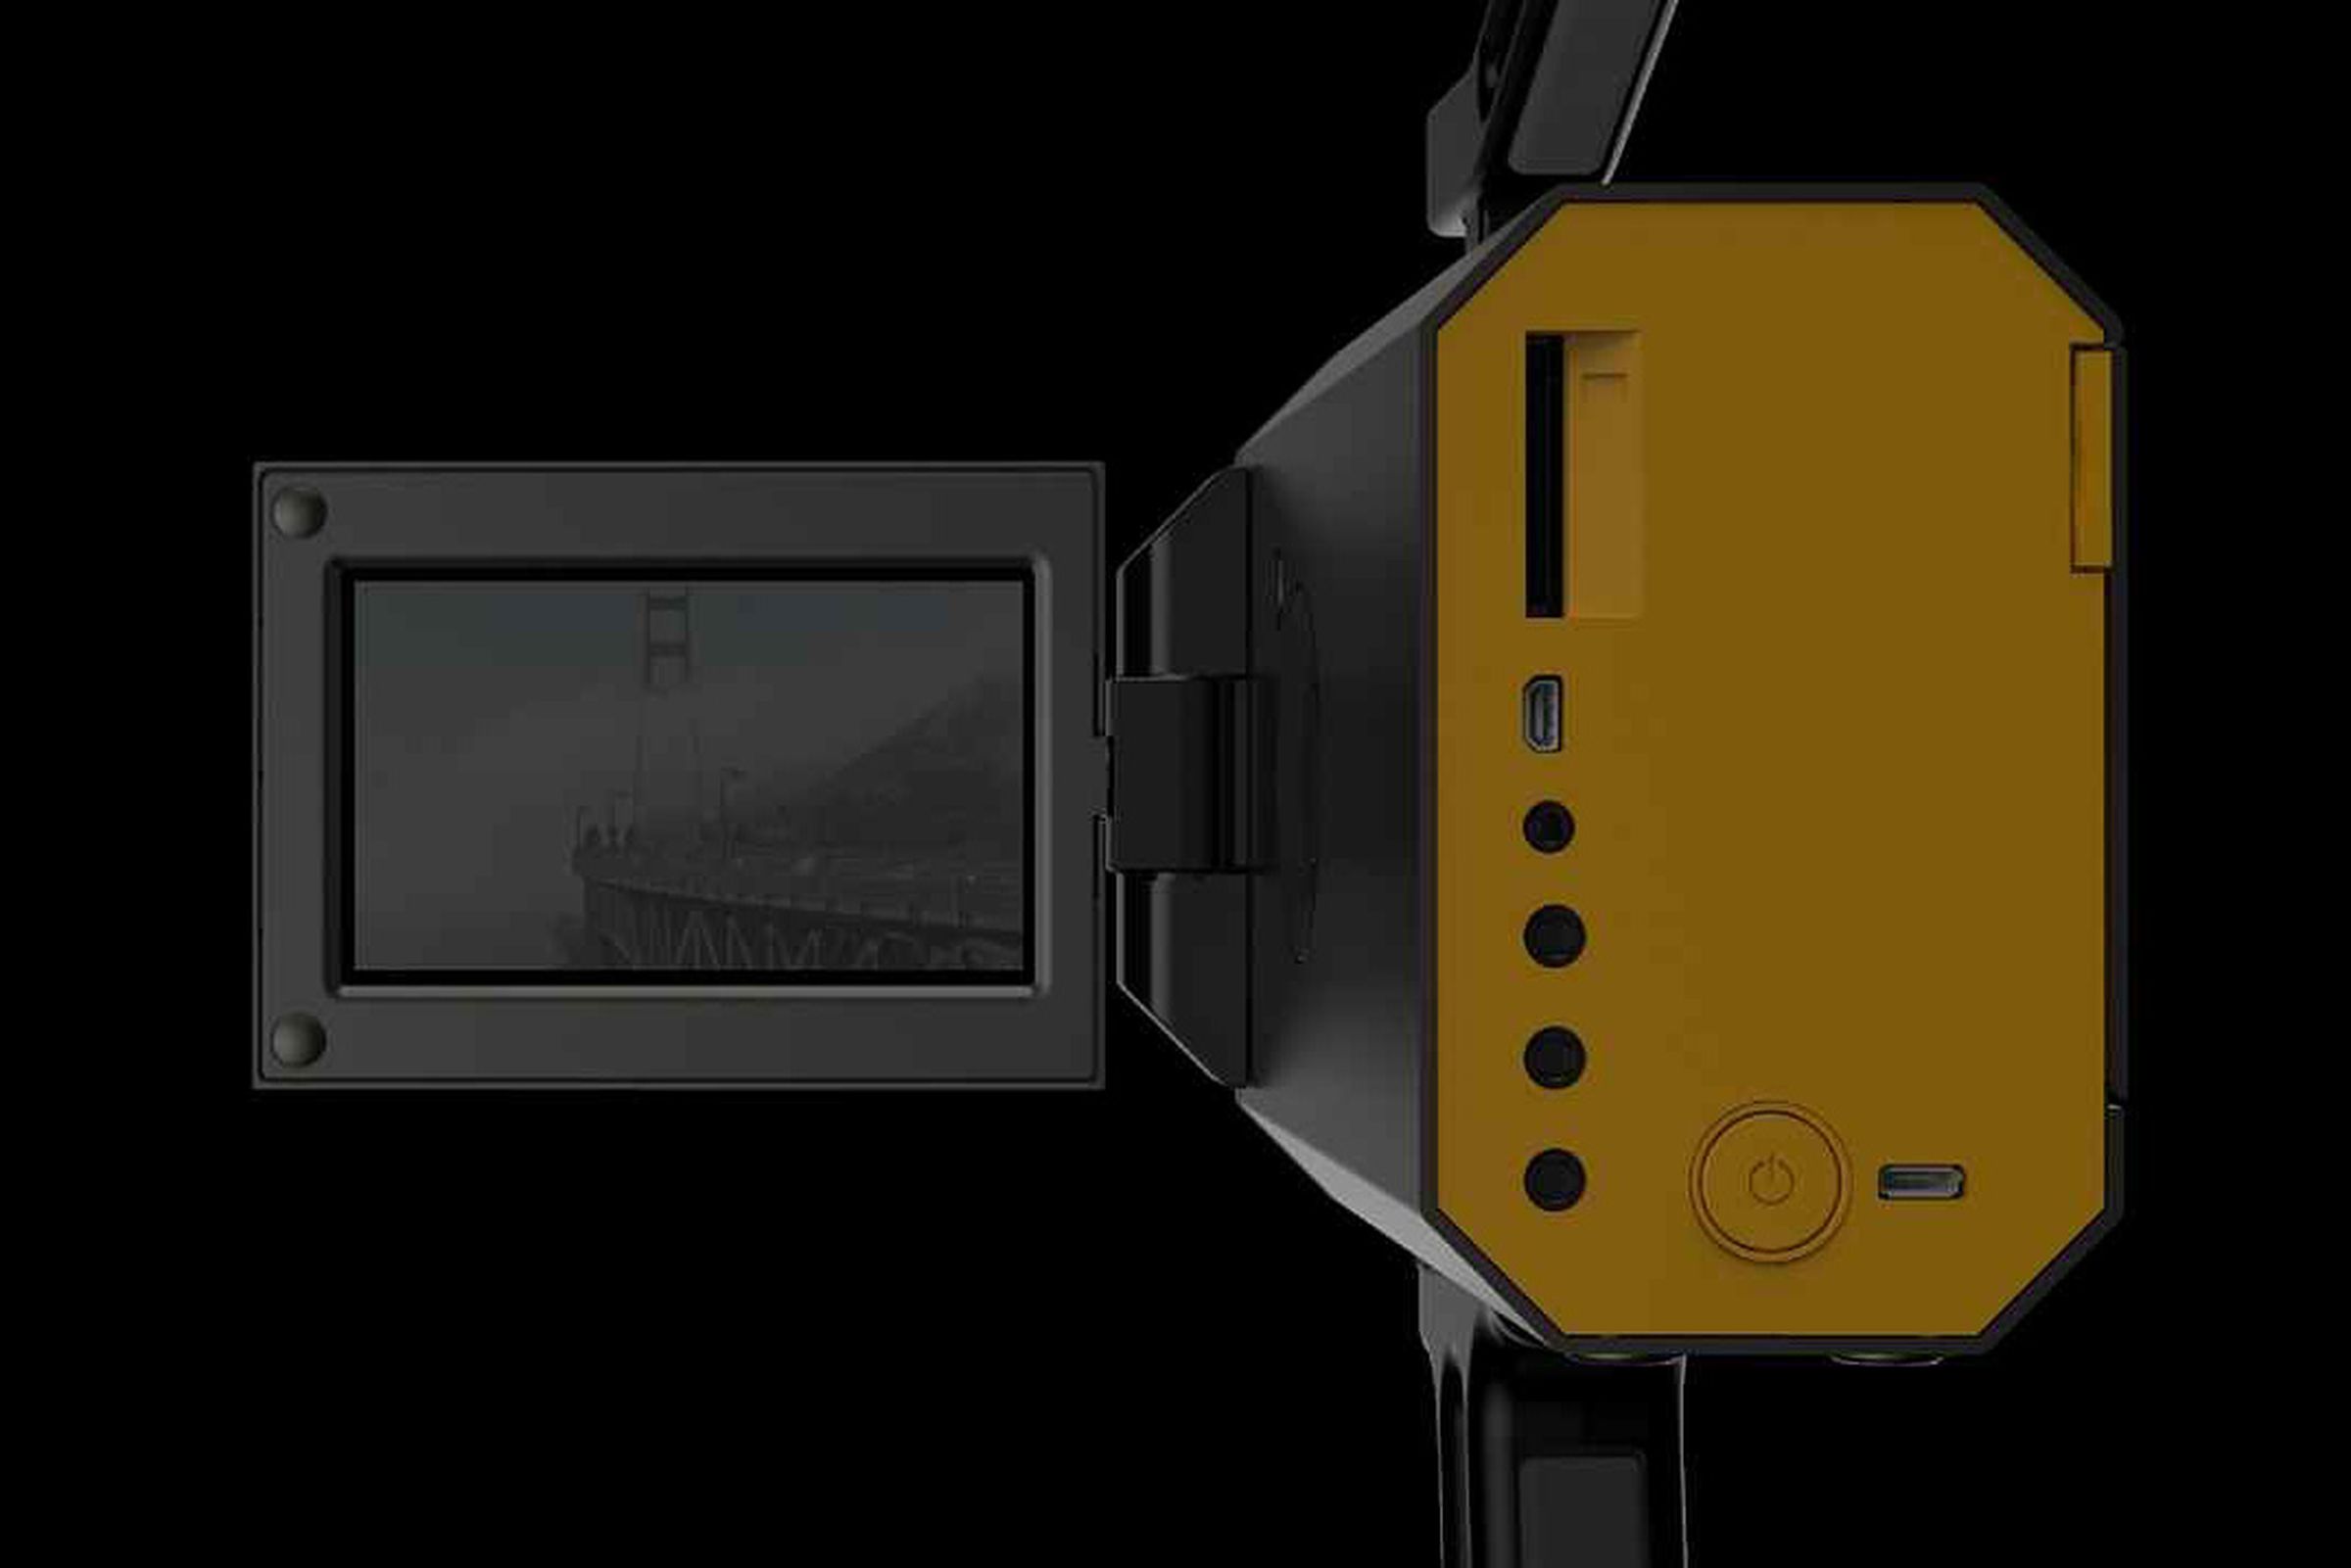 Super 8 camera from the back showing viewfinder.